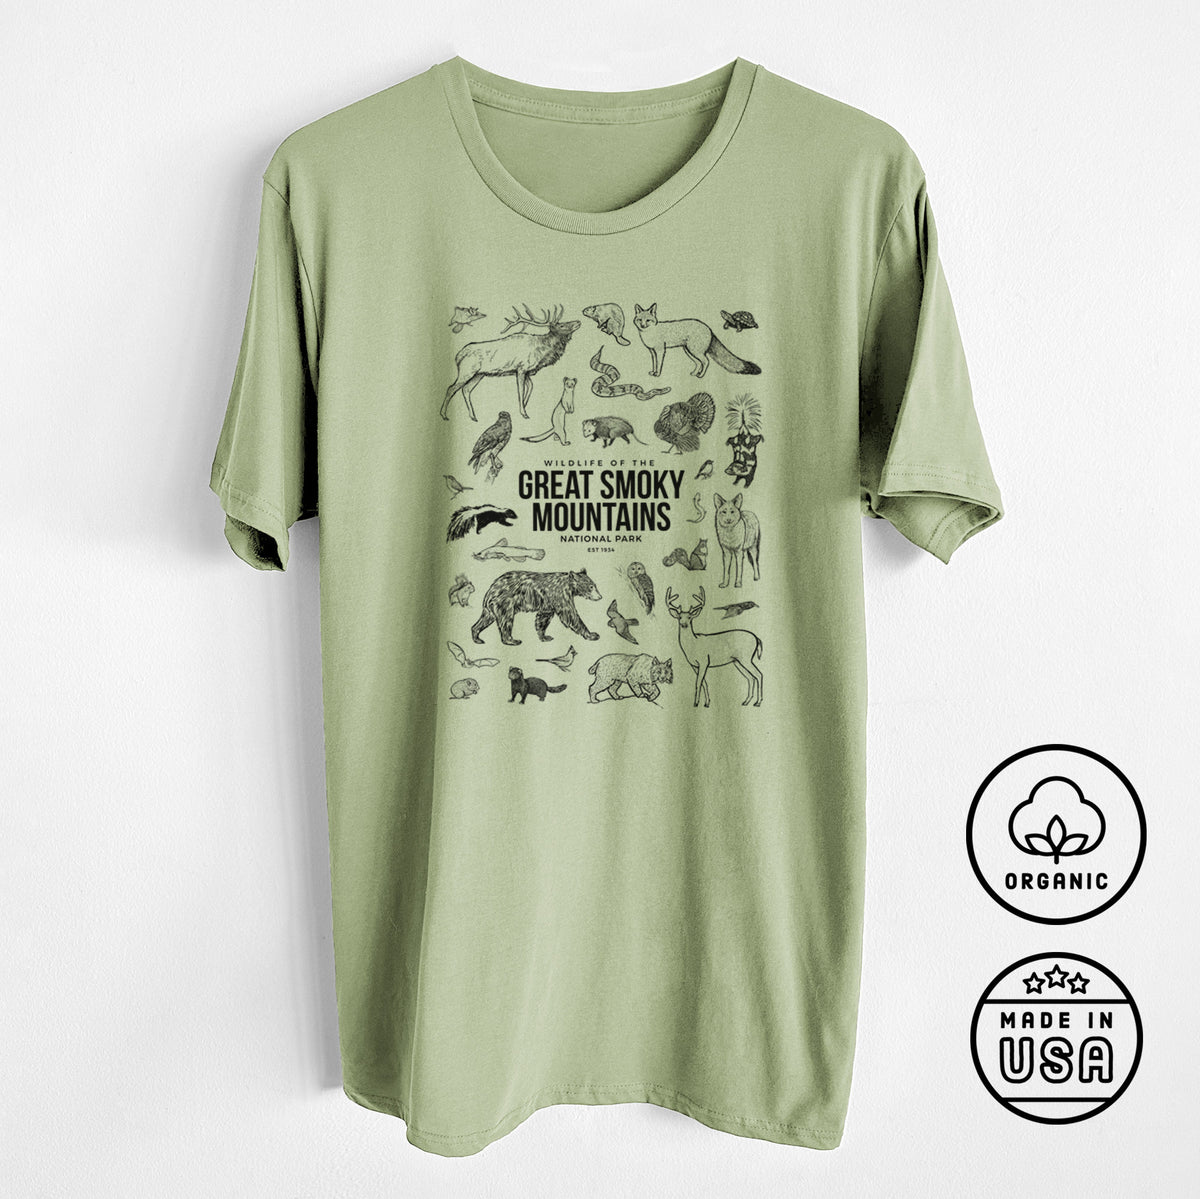 Wildlife of the Great Smoky Mountains National Park - Unisex Crewneck - Made in USA - 100% Organic Cotton